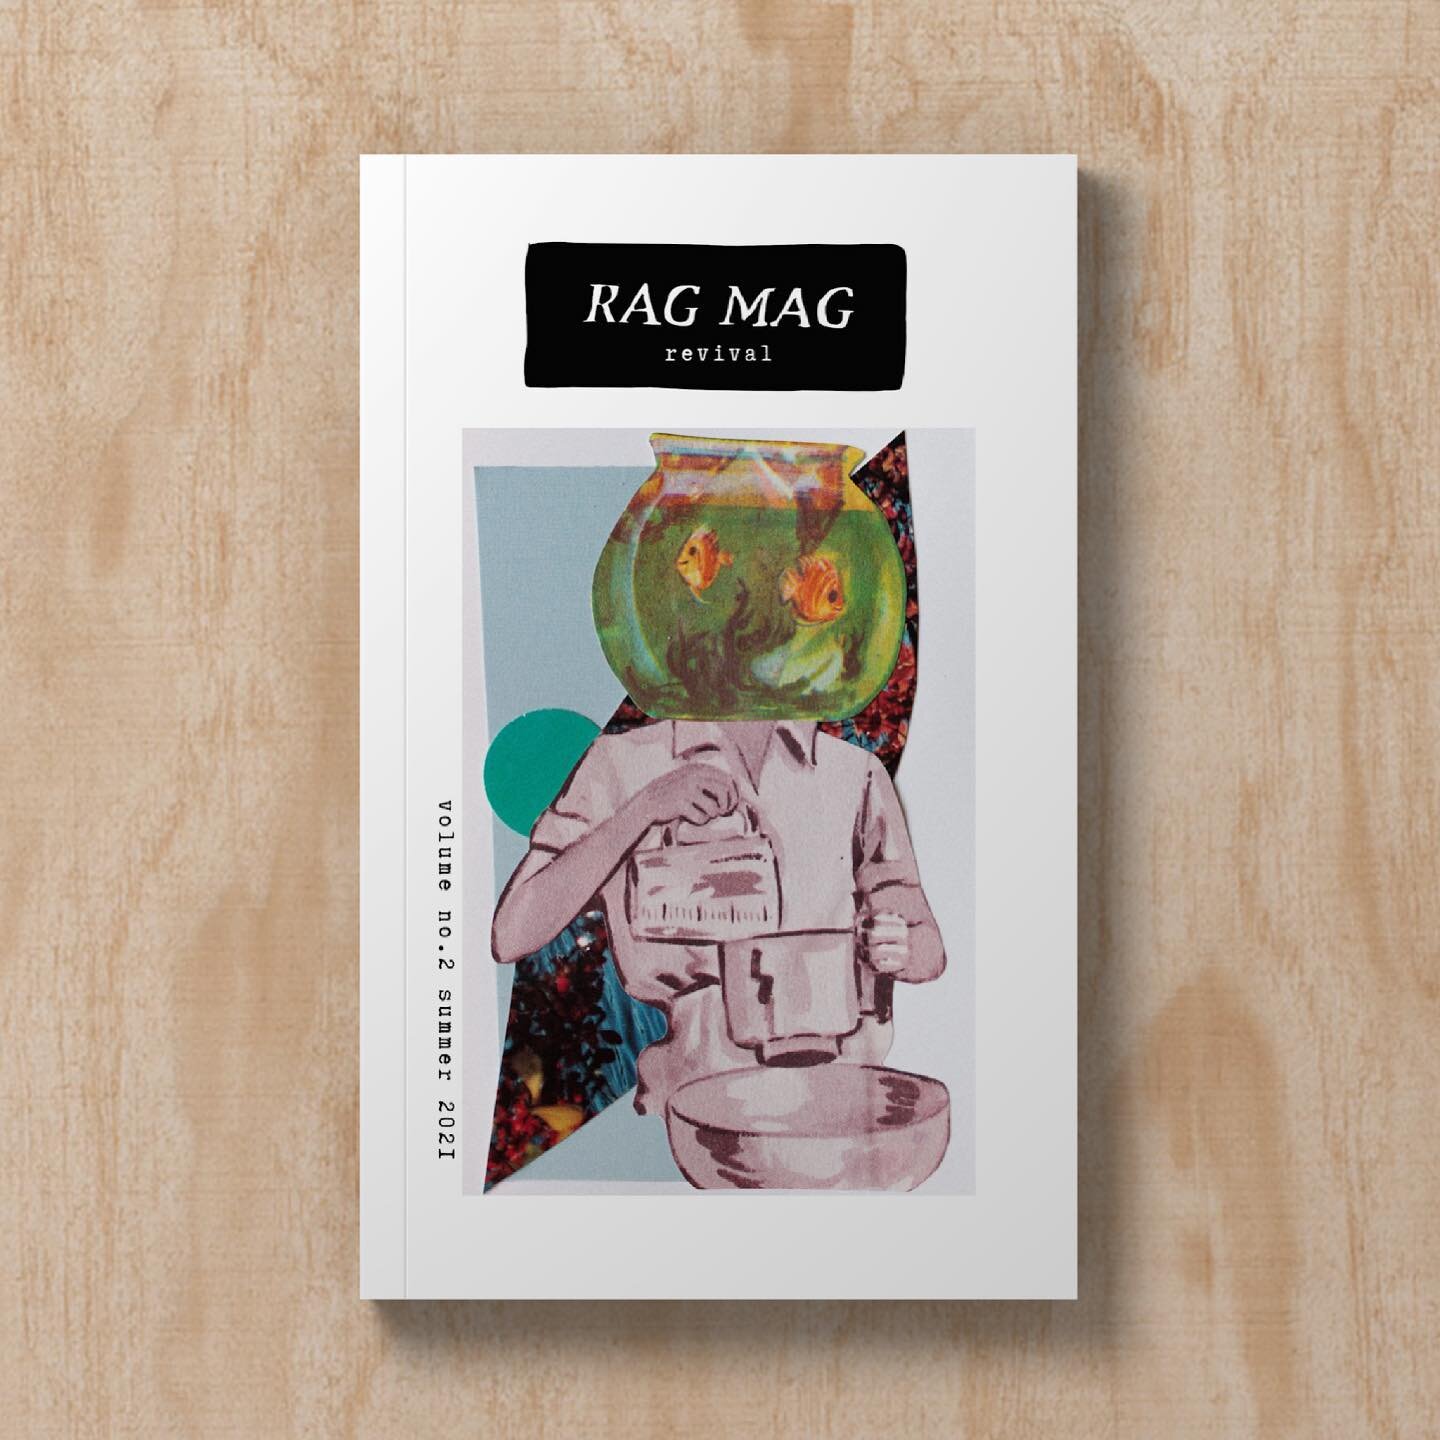 After a busy spring I am happy to announce that Rag Mag Revival No. 2 is now available for presale!!!!

Our second publication as a team and this one holds a special place in my heart. 

This is a revival of a project that my grandma used to do in th